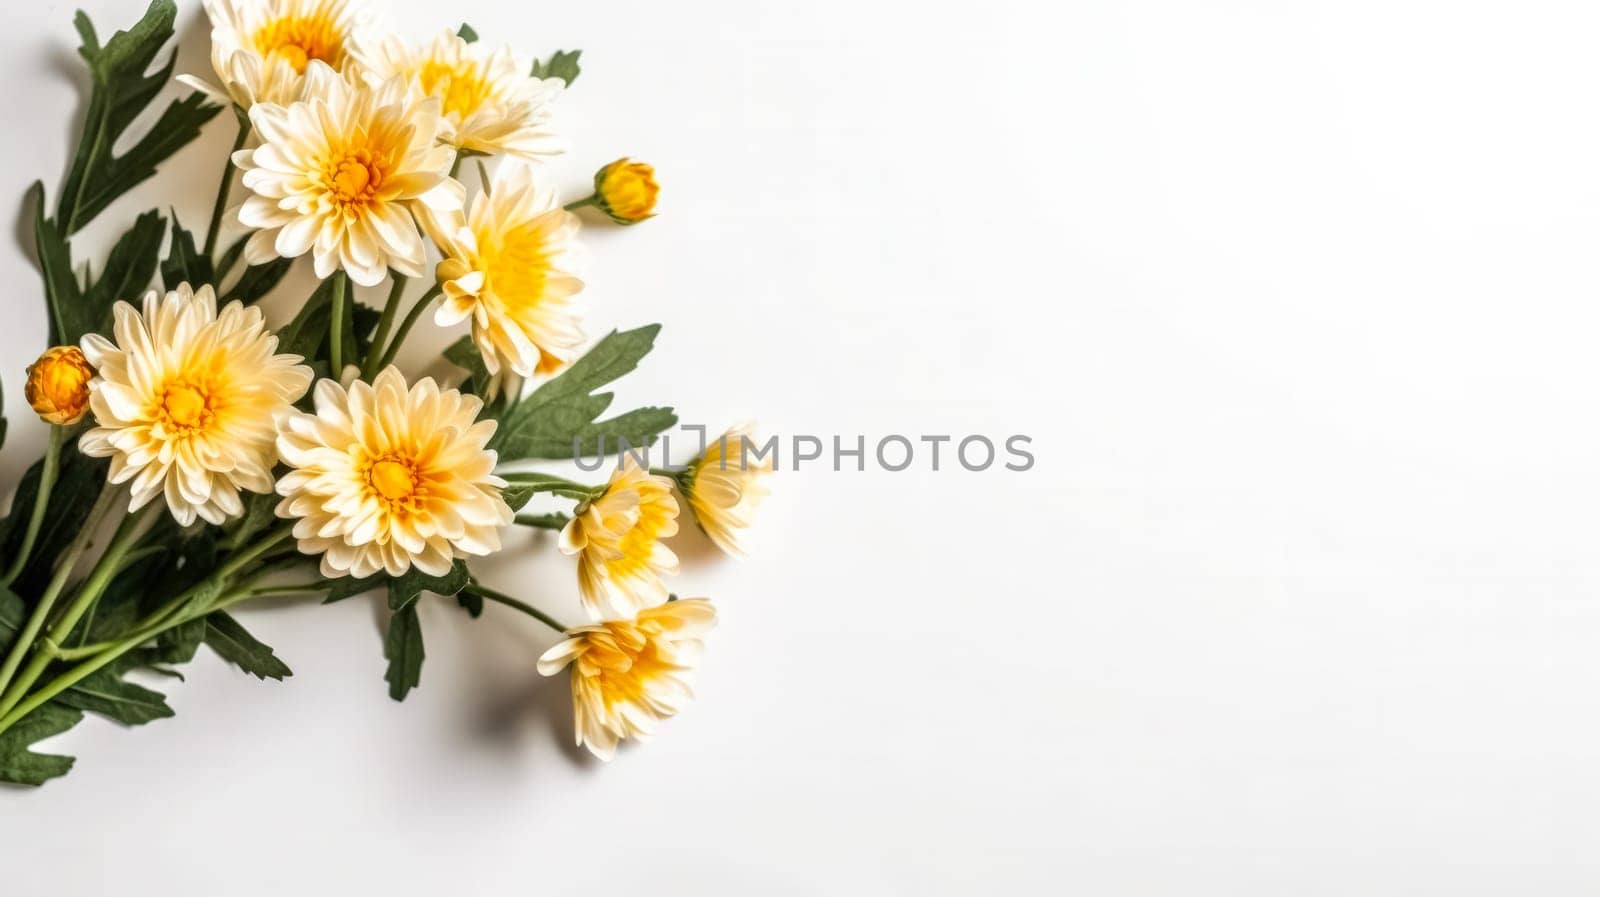 yellow chrysanthemums against a pristine white background by Alla_Morozova93